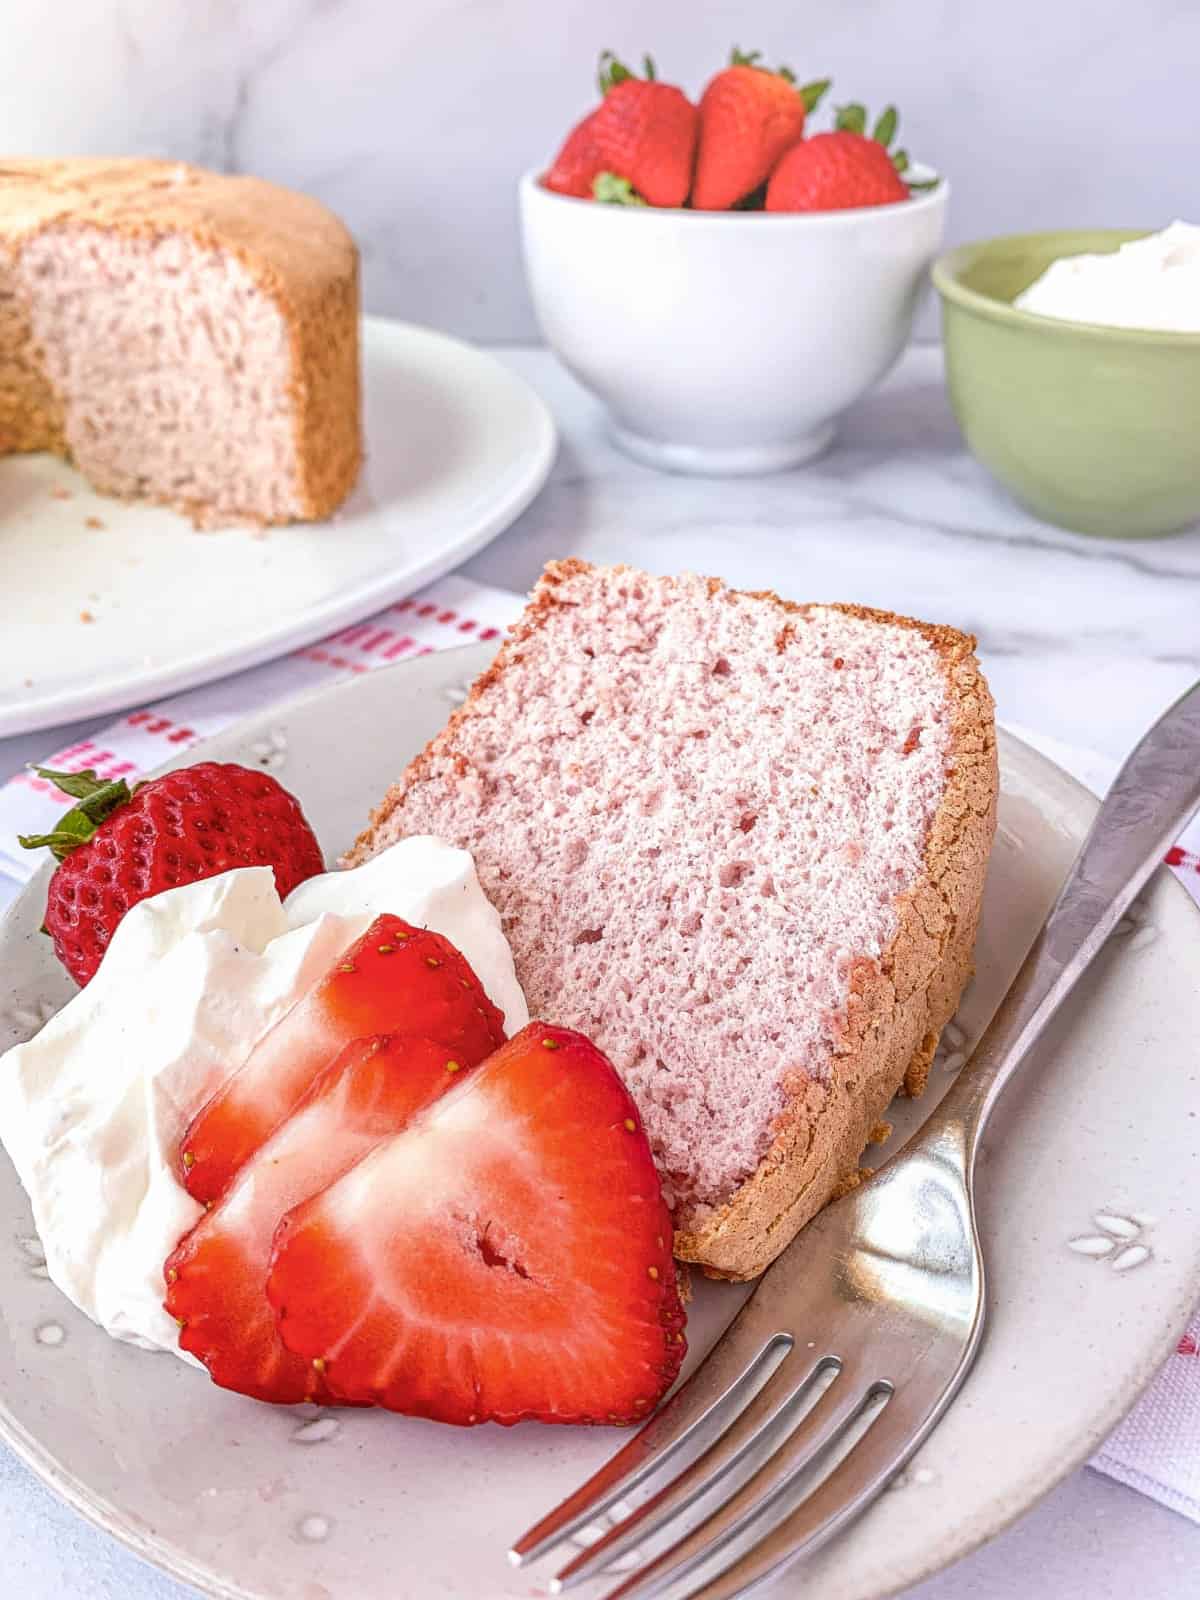 Slice of Strawberry Angel Food Cake on a plate with whipped cream and fresh strawberries.